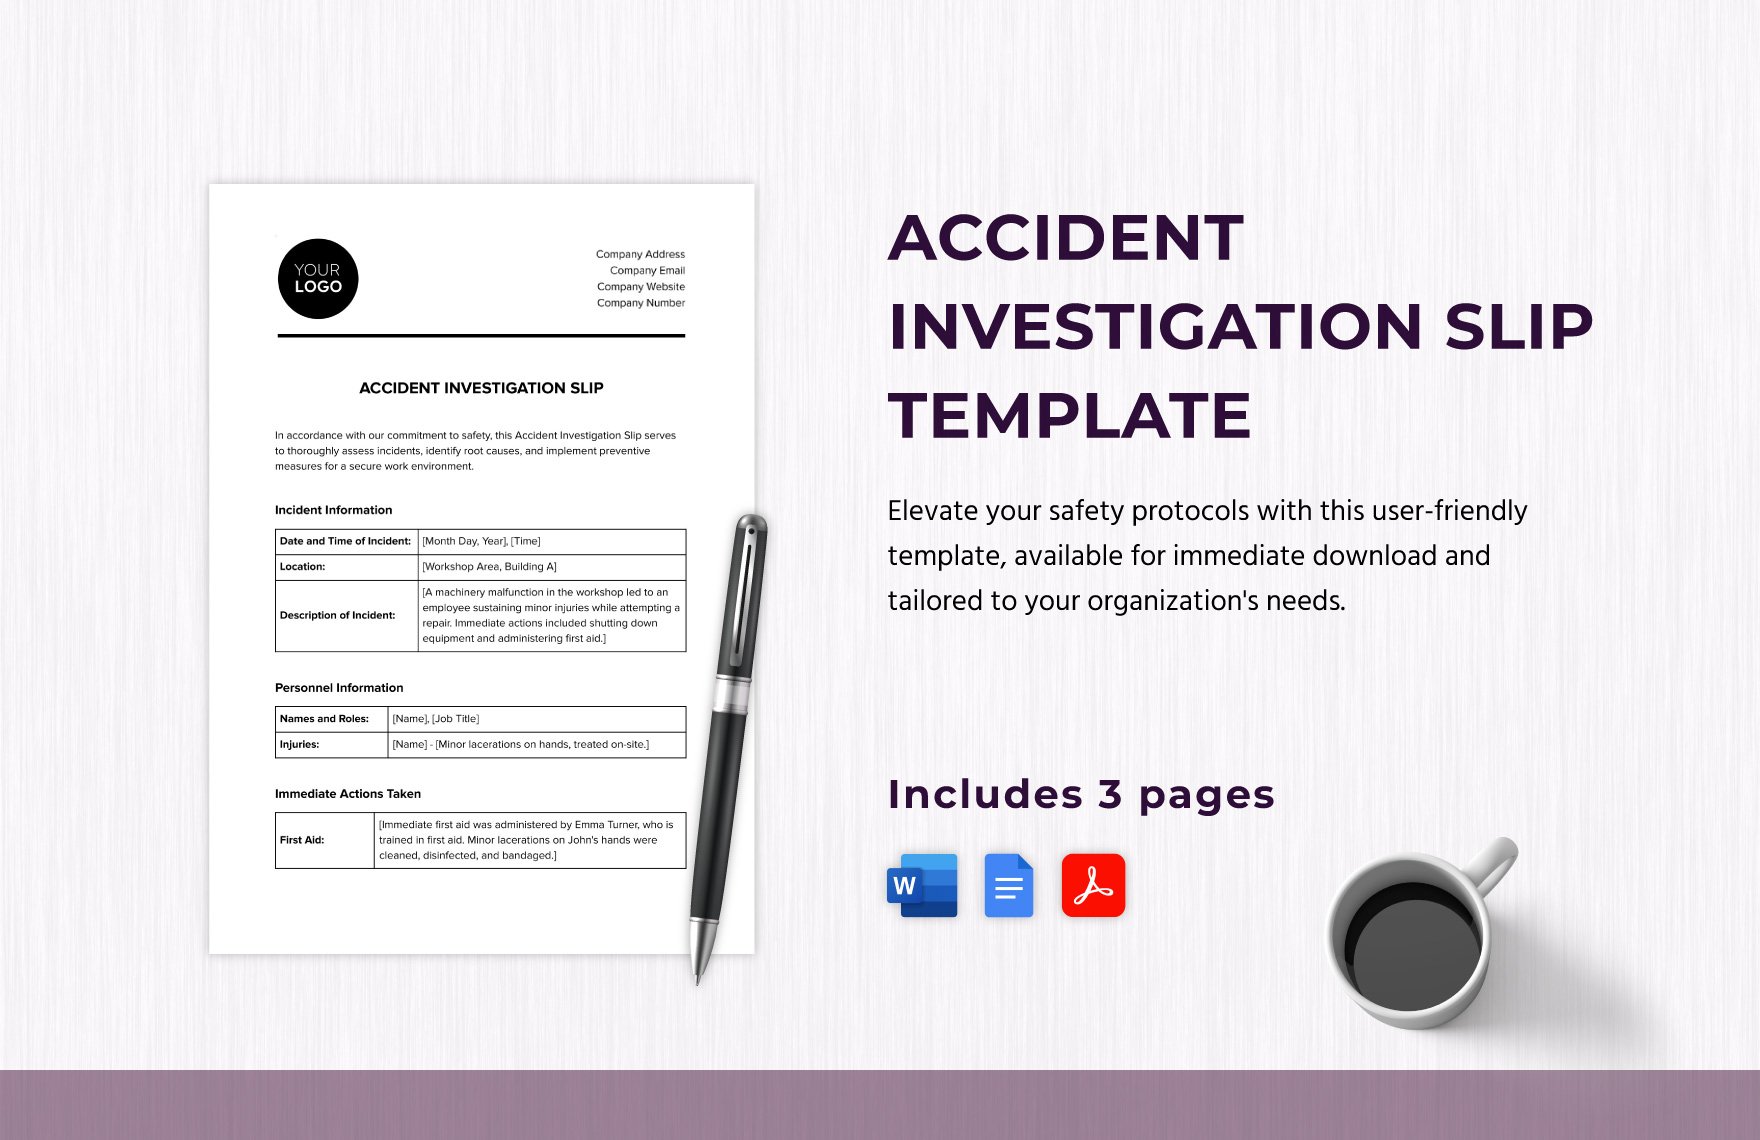 Accident Investigation Slip Template in Word, Google Docs, PDF